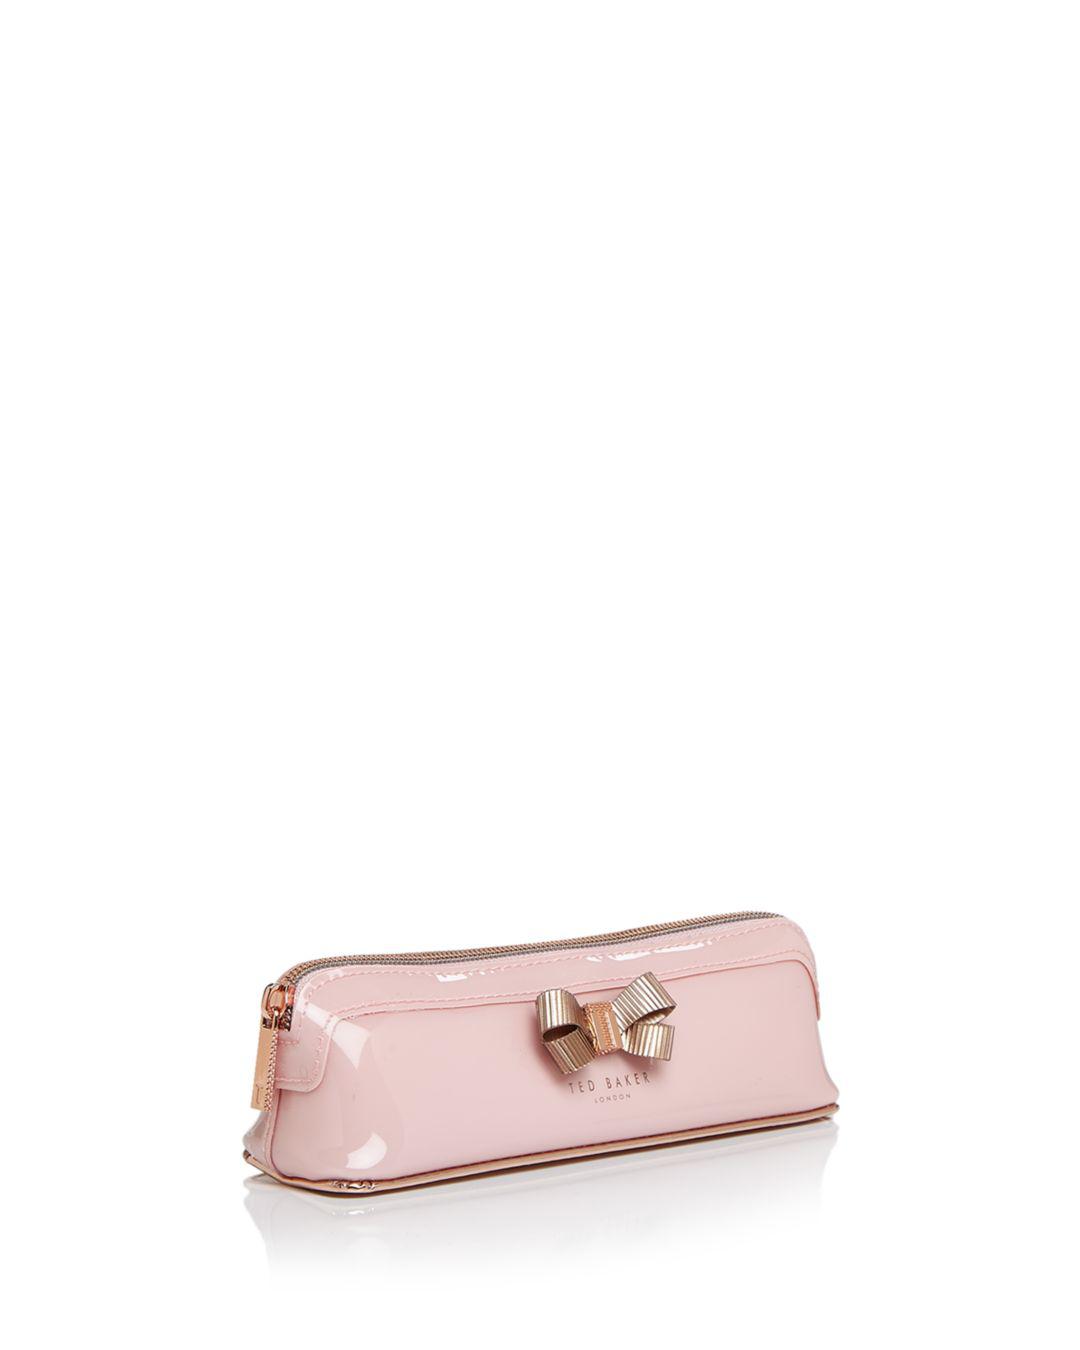 Ted Baker Lora Bow Pencil Case in Pink | Lyst